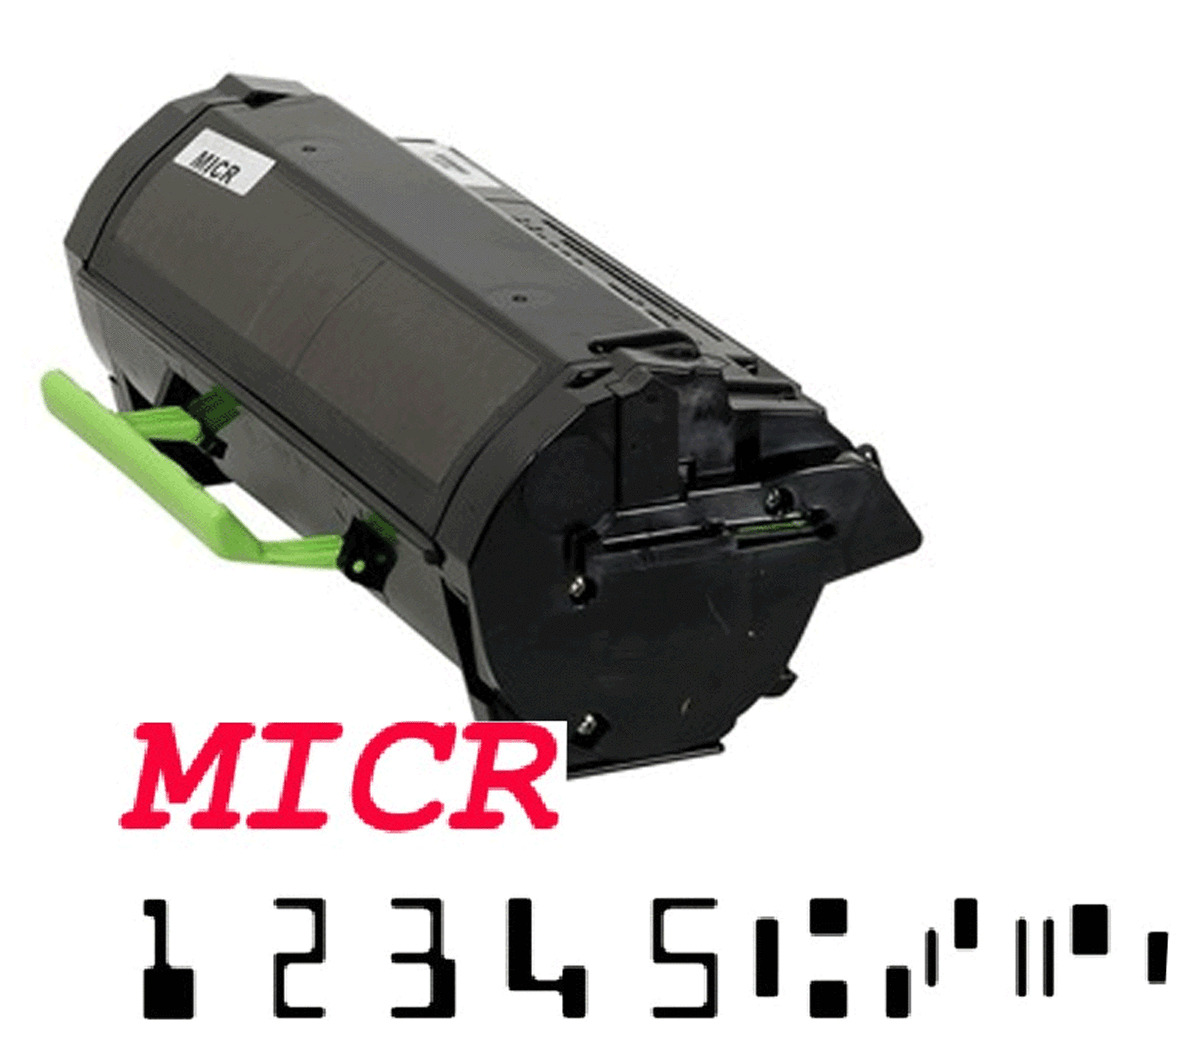 MICR Reman. GGCTW Check Toner Cartridge for Dell S2830dn (8,500 pages)